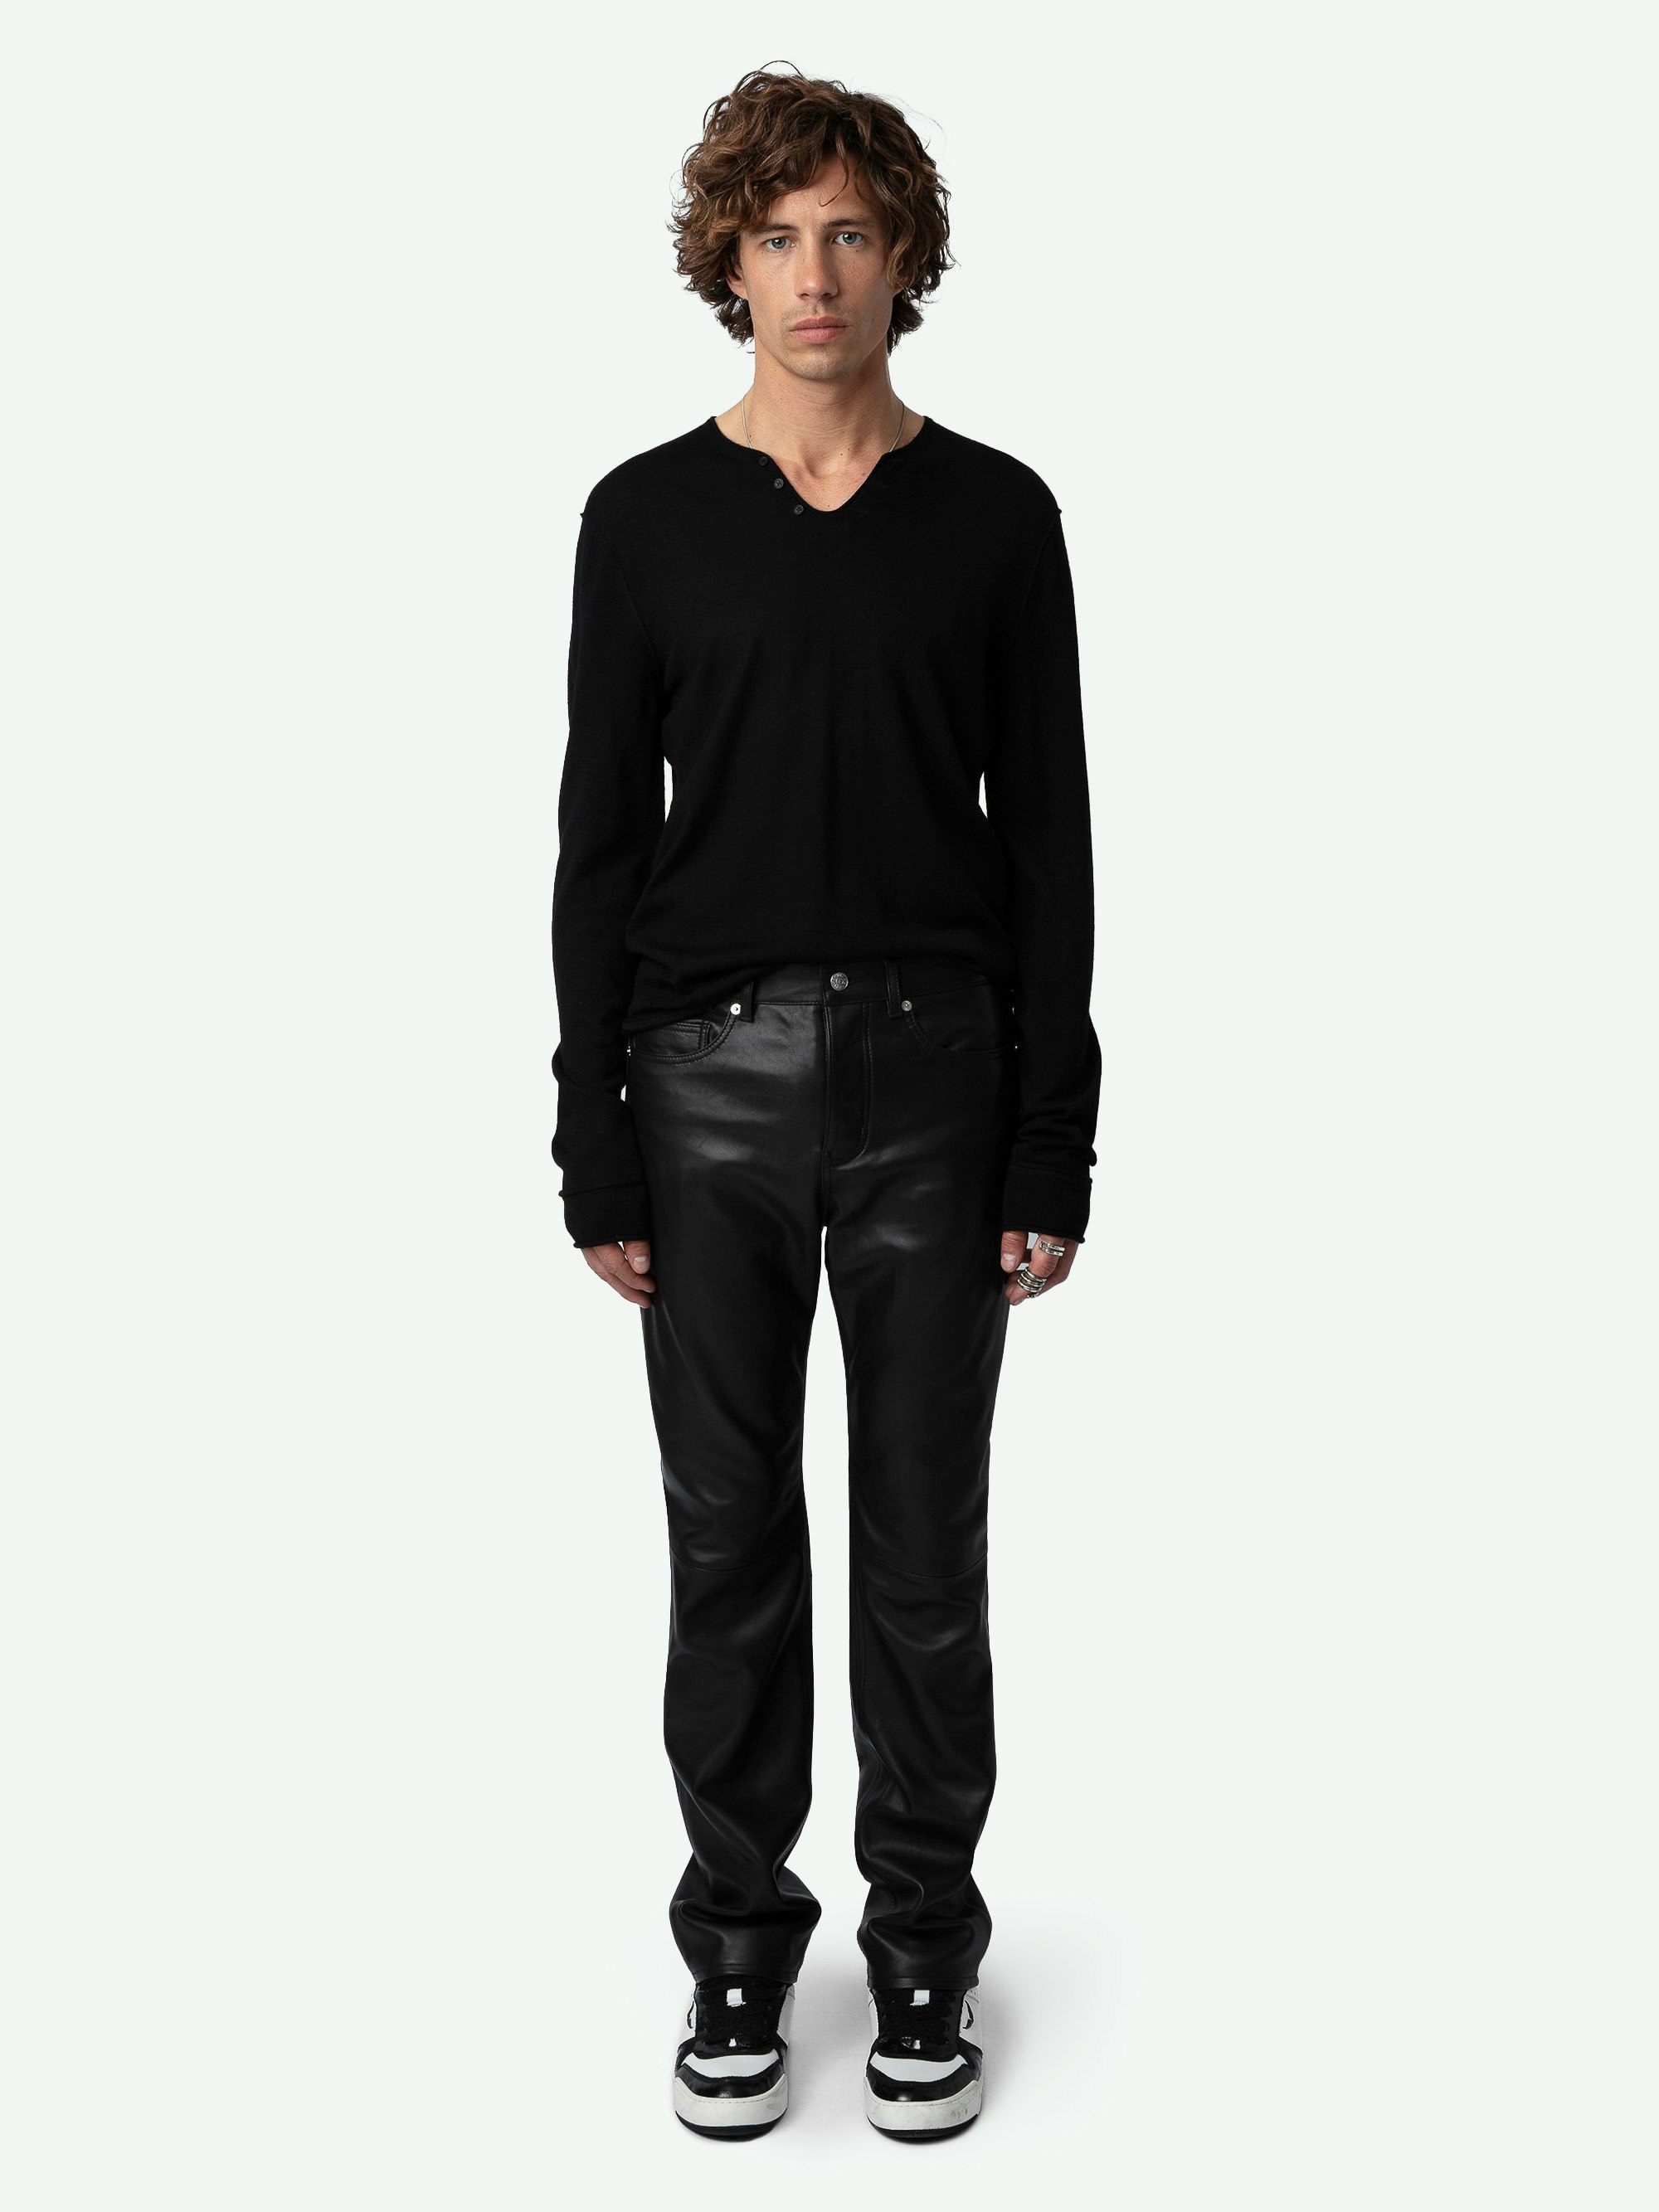 John Leather Pants - Straight-leg smooth black leather pants with pockets and topstitching.